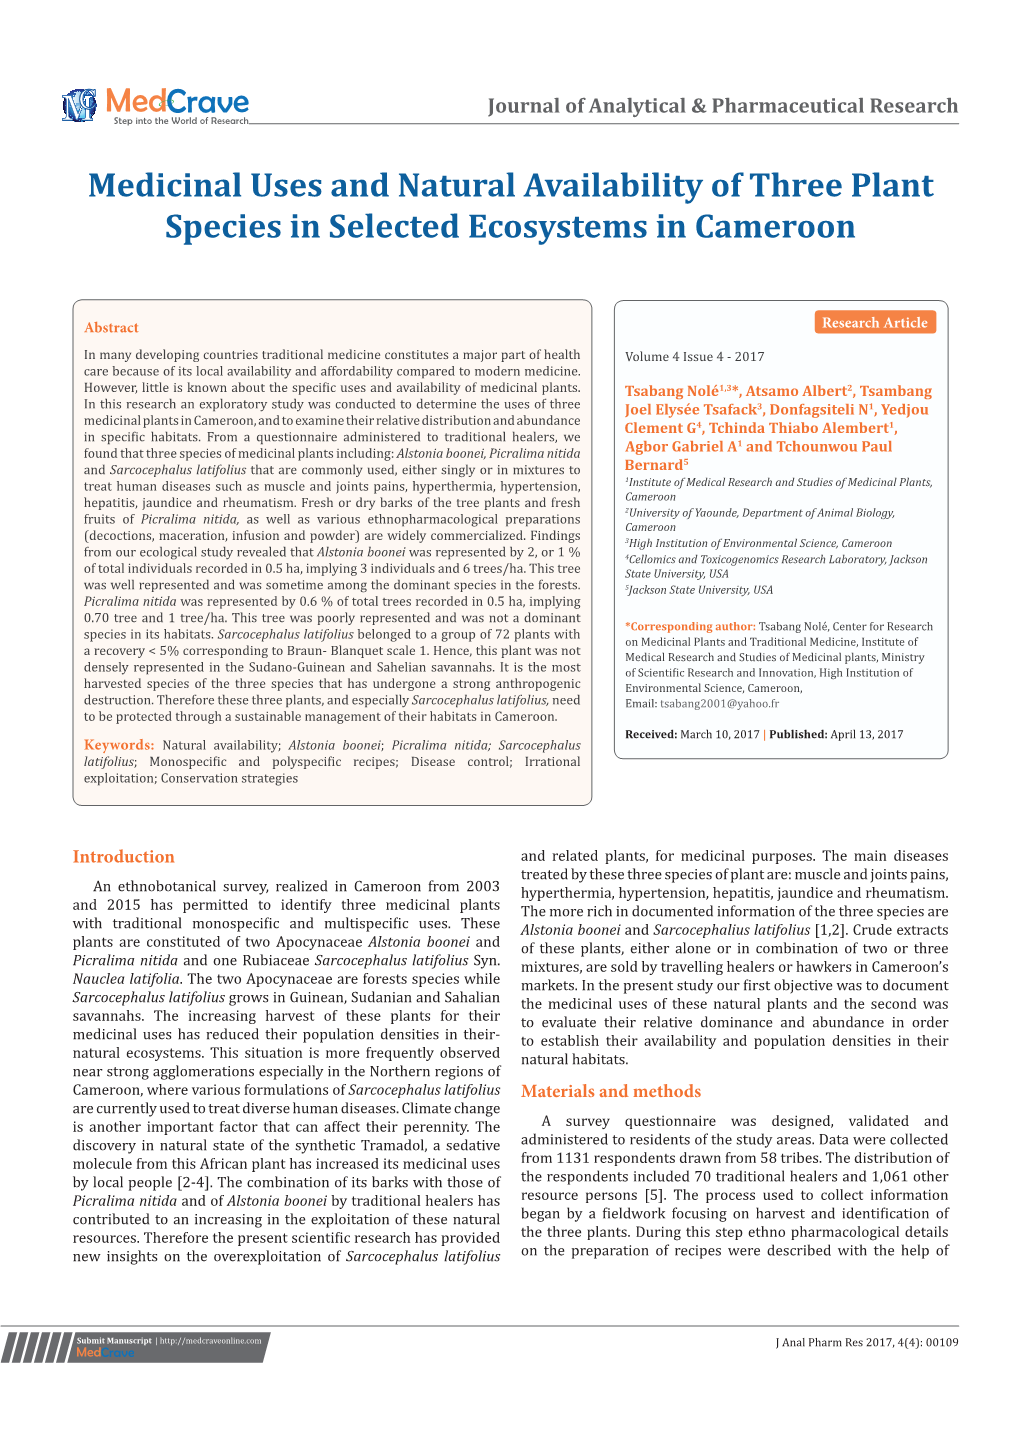 Medicinal Uses and Natural Availability of Three Plant Species in Selected Ecosystems in Cameroon